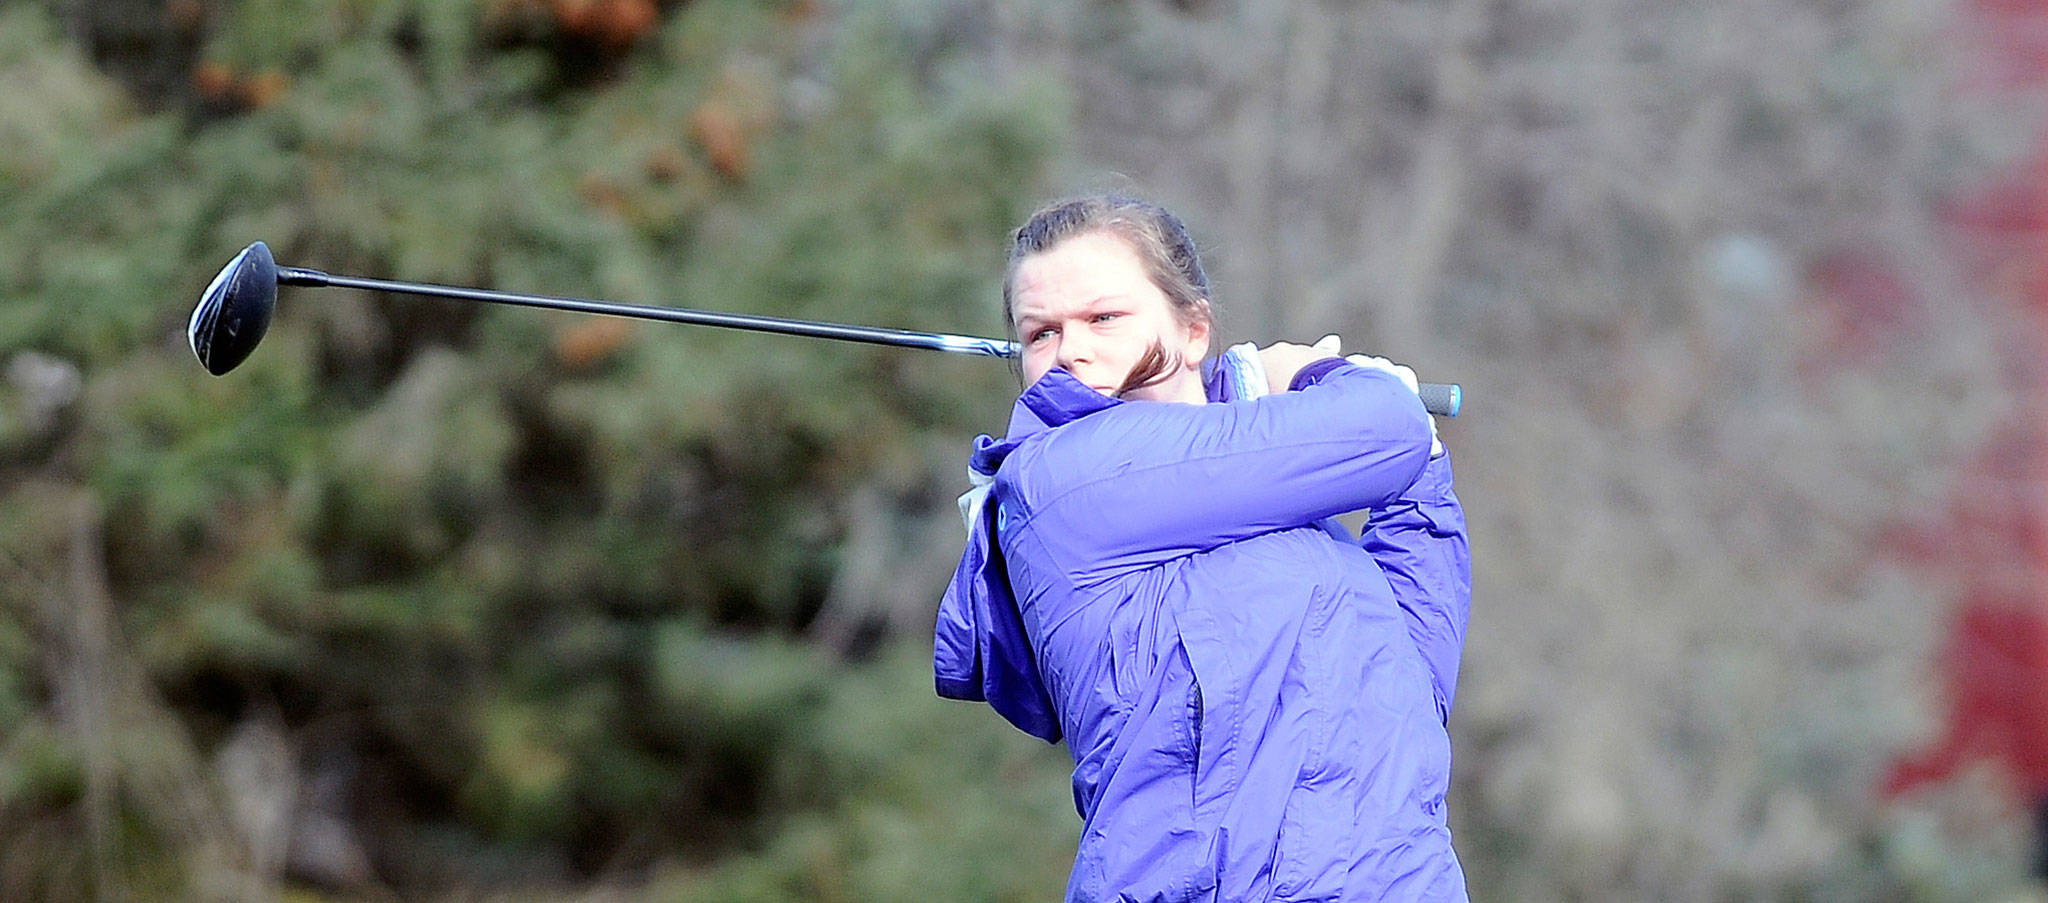 Sequim’s Sarah Shea follows through on her swing at The Cedars at Dungeness’ hole No. 3 as Shea and the Wolves take on Bremerton in March. Shea recently signed a letter of intent to play for the Western Washington Vikings next year. Sequim Gazette file photo by Michael Dashiell